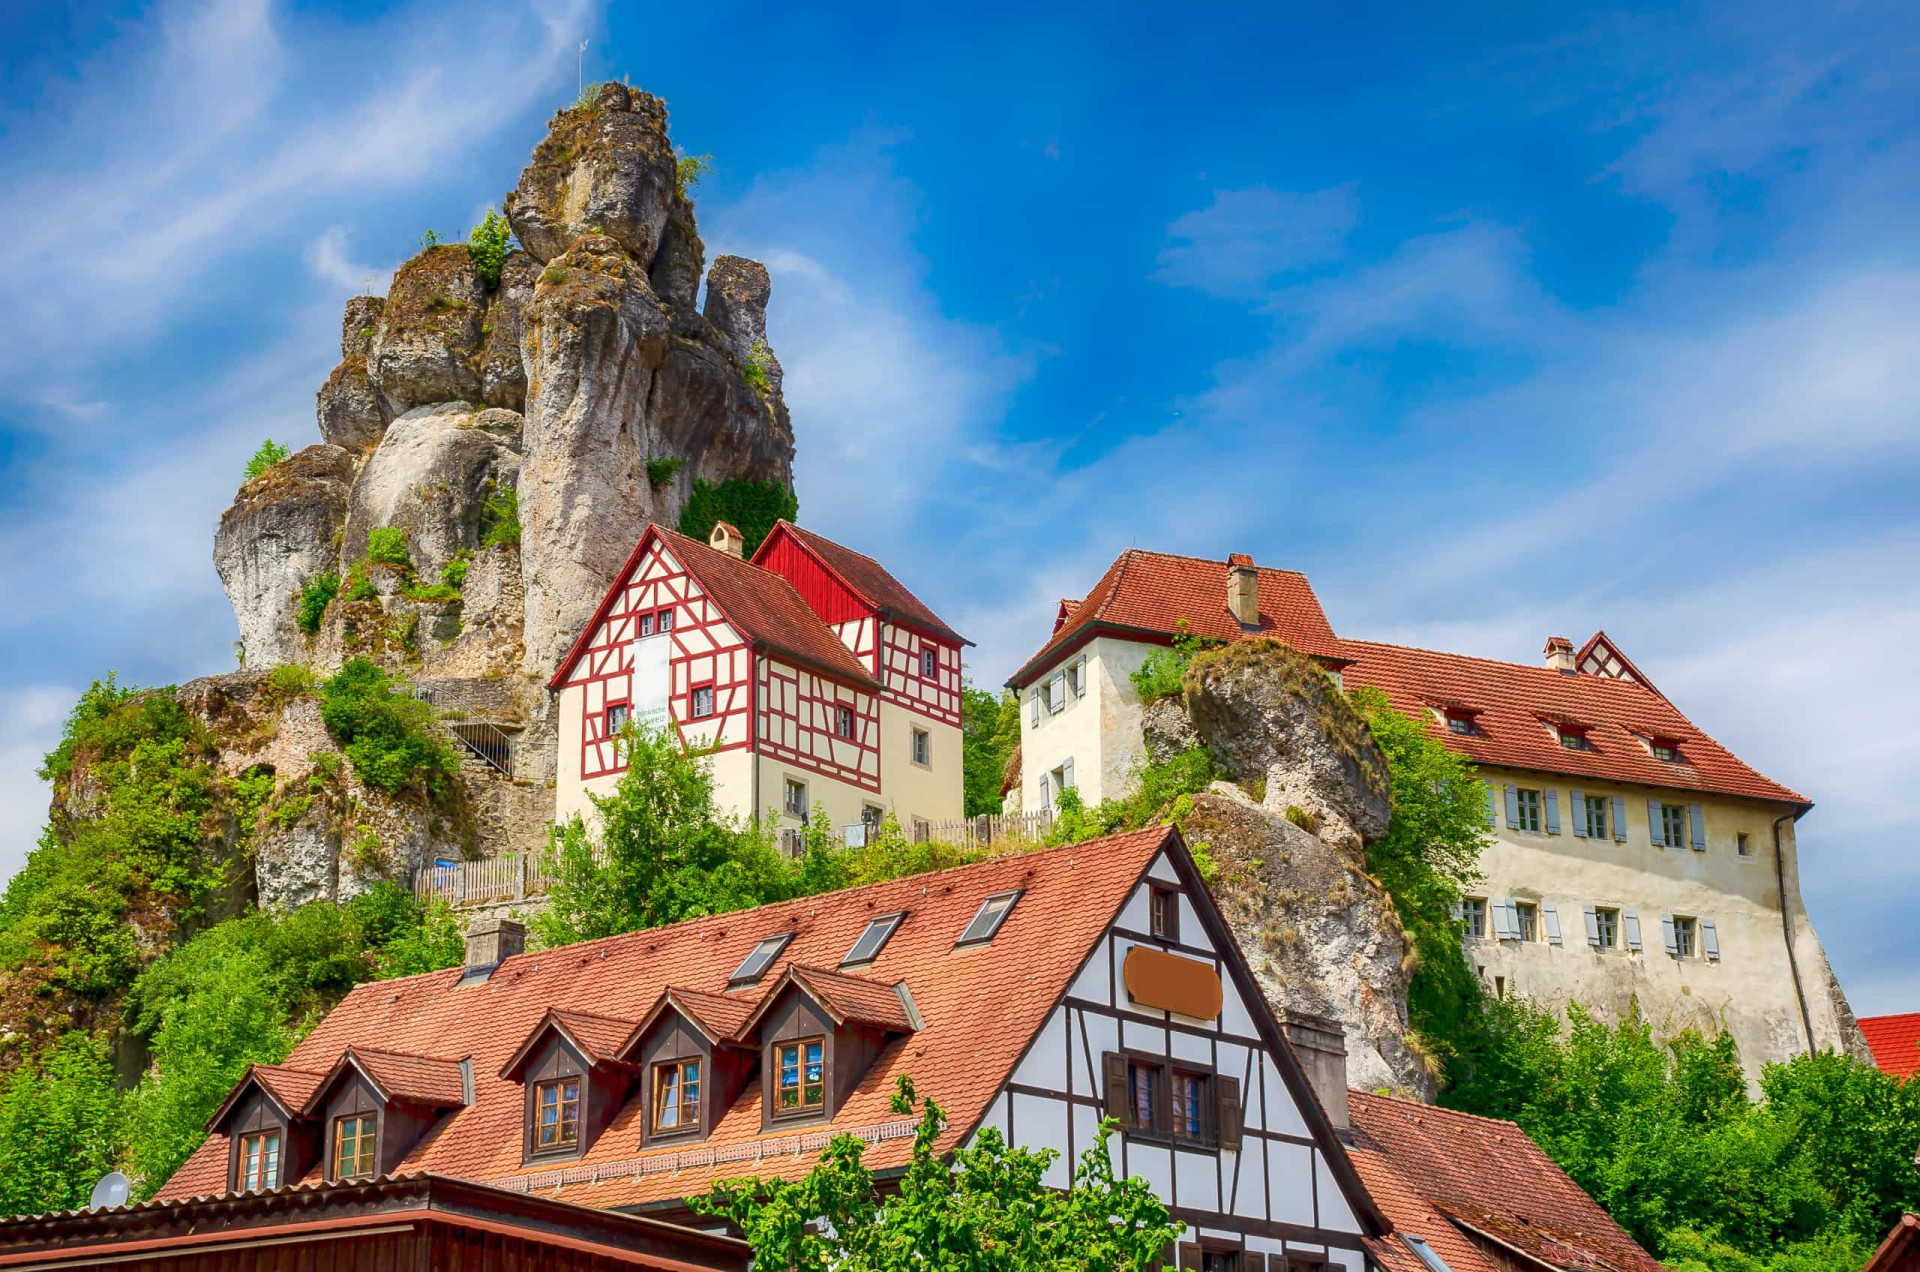 <p>The village of Tüchersfeld in the Püttlach valley amazes with its cluster of half timber-framed houses, set as if glued onto the rocks.</p><p>You may also like:<a href="https://www.starsinsider.com/n/227485?utm_source=msn.com&utm_medium=display&utm_campaign=referral_description&utm_content=481885v1en-us"> The dark secrets zoos don't want you to know about</a></p>